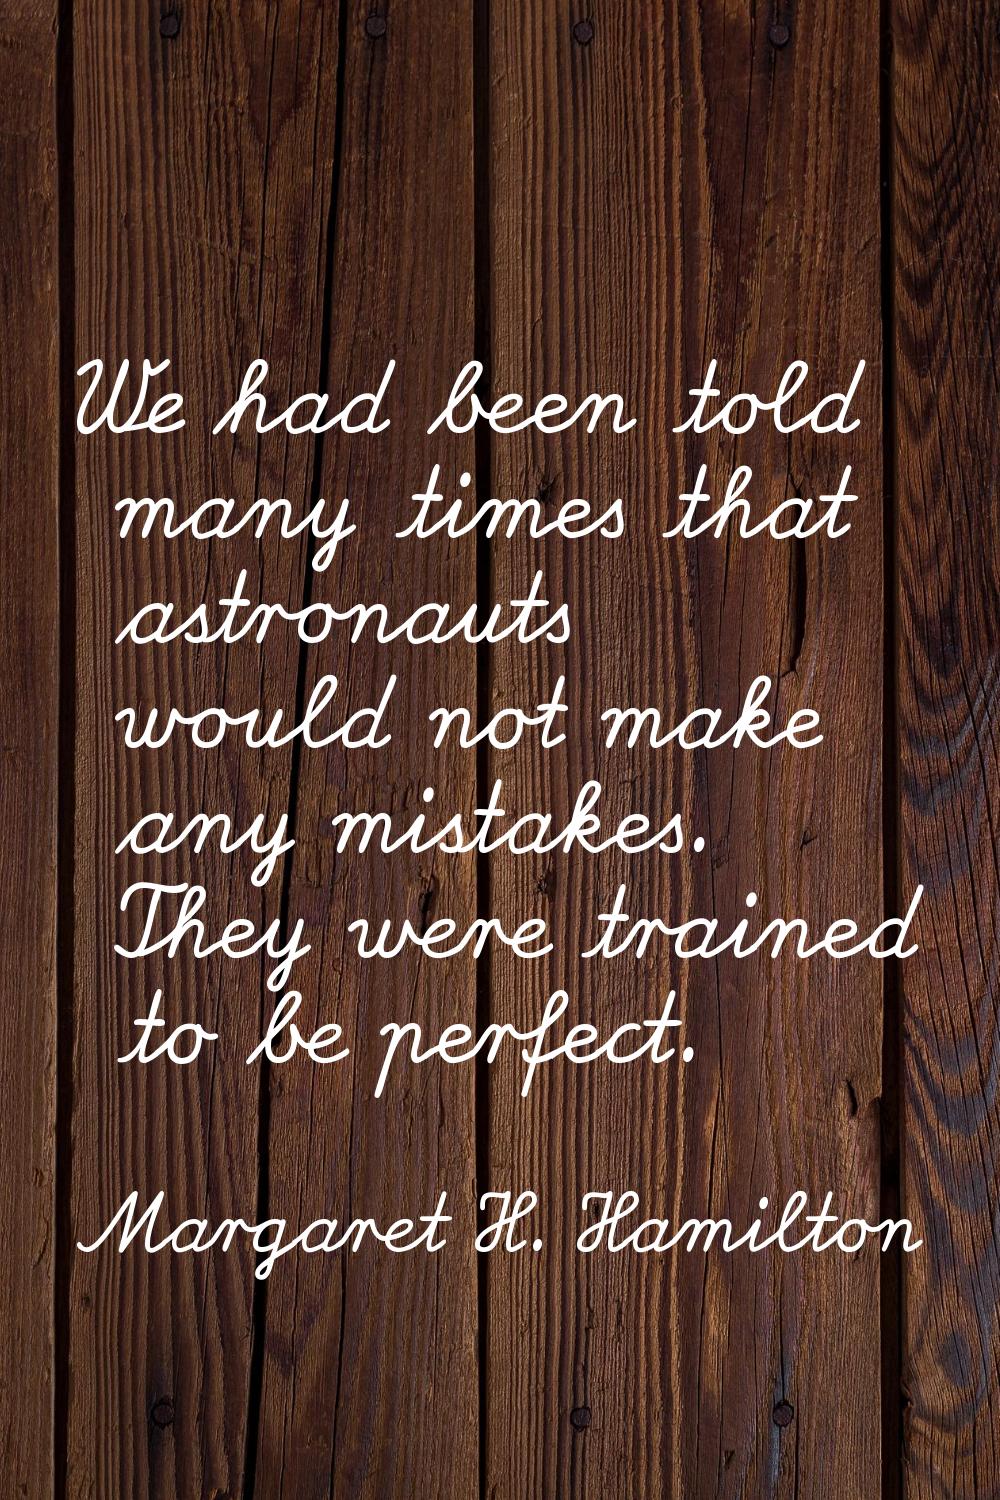 We had been told many times that astronauts would not make any mistakes. They were trained to be pe